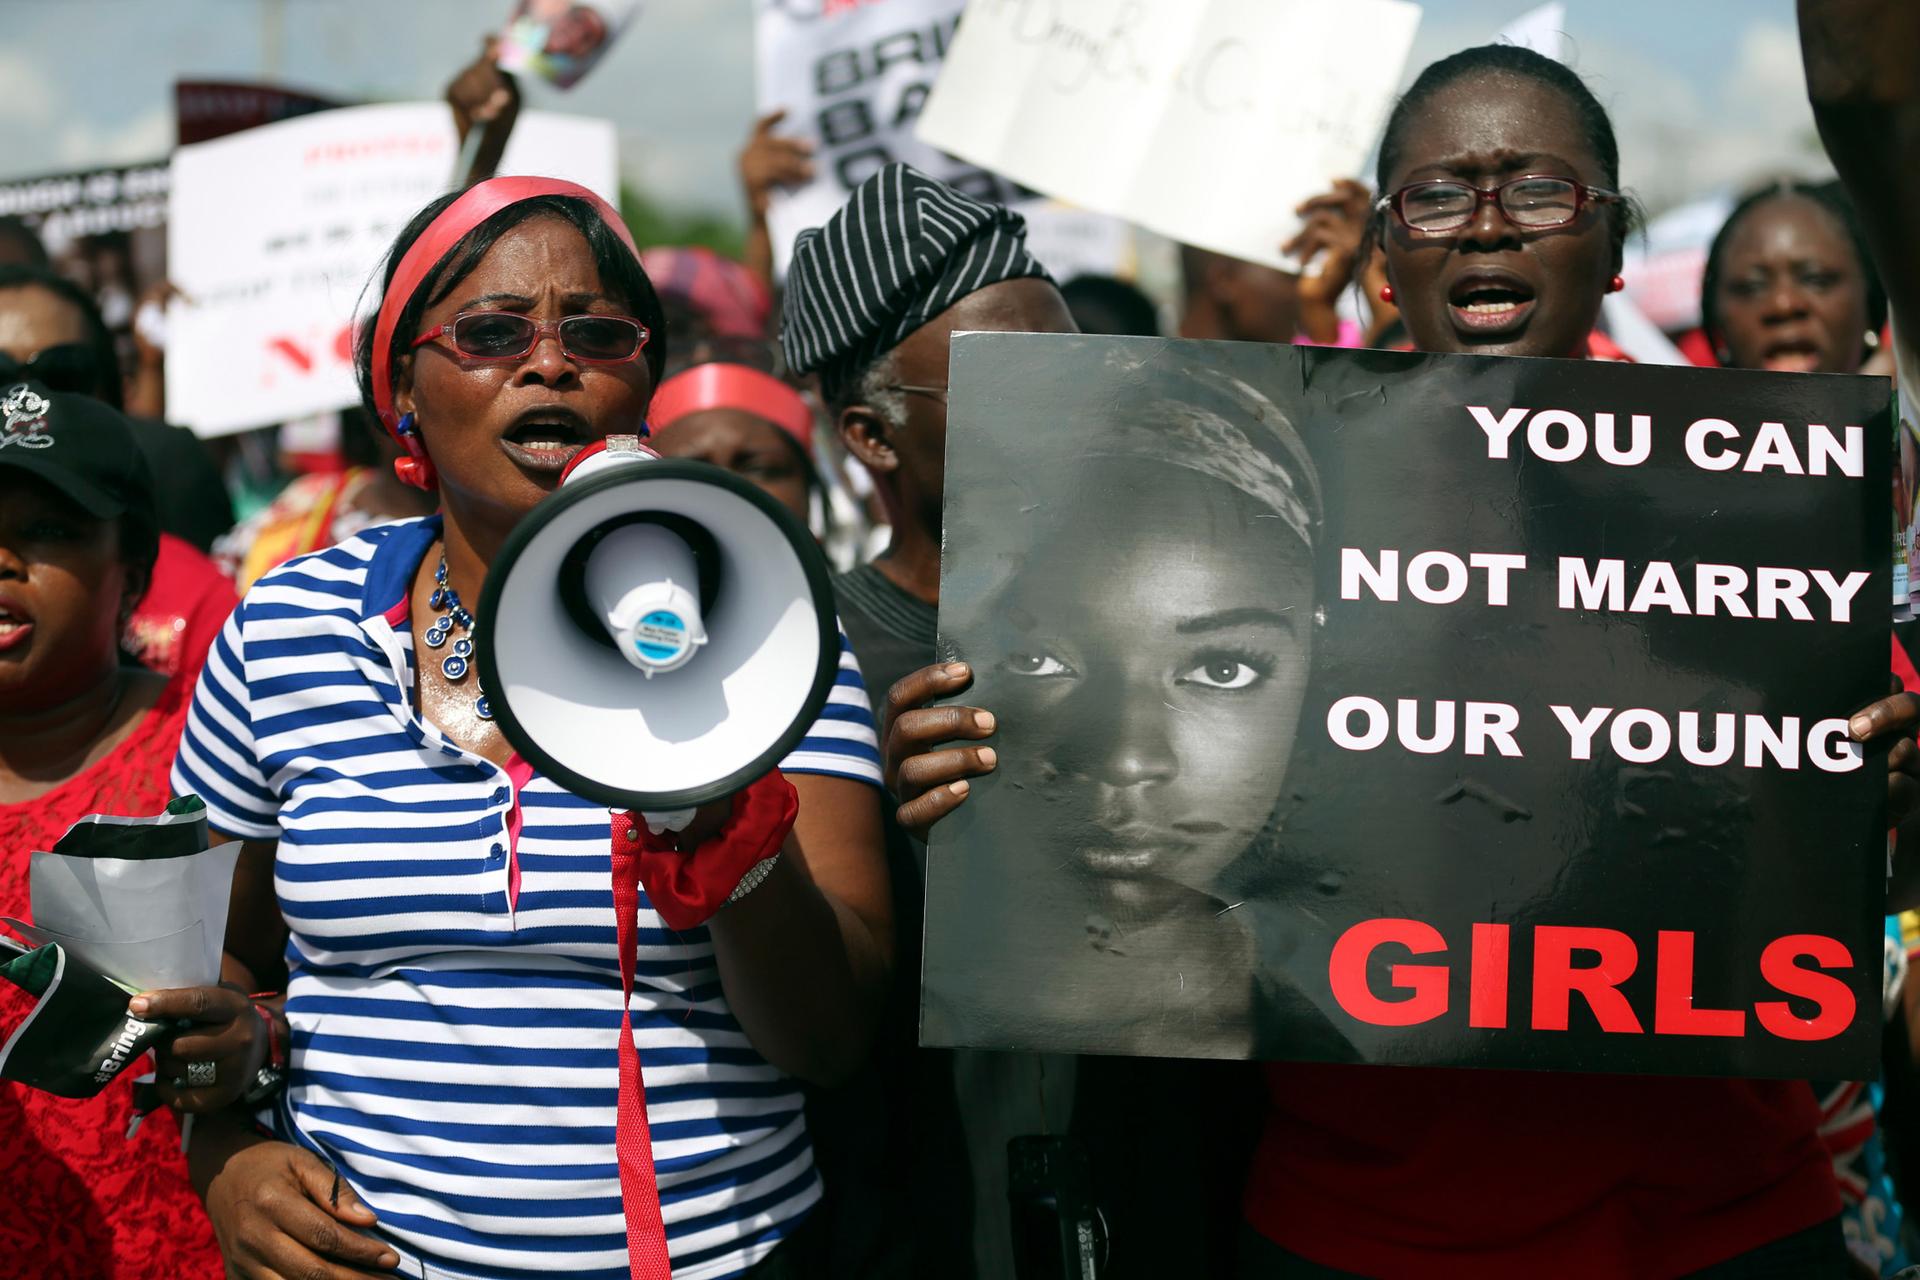 Protesters in Lagos demanding the release of abducted teenage school girls from the remote Nigerian village of Chibok.